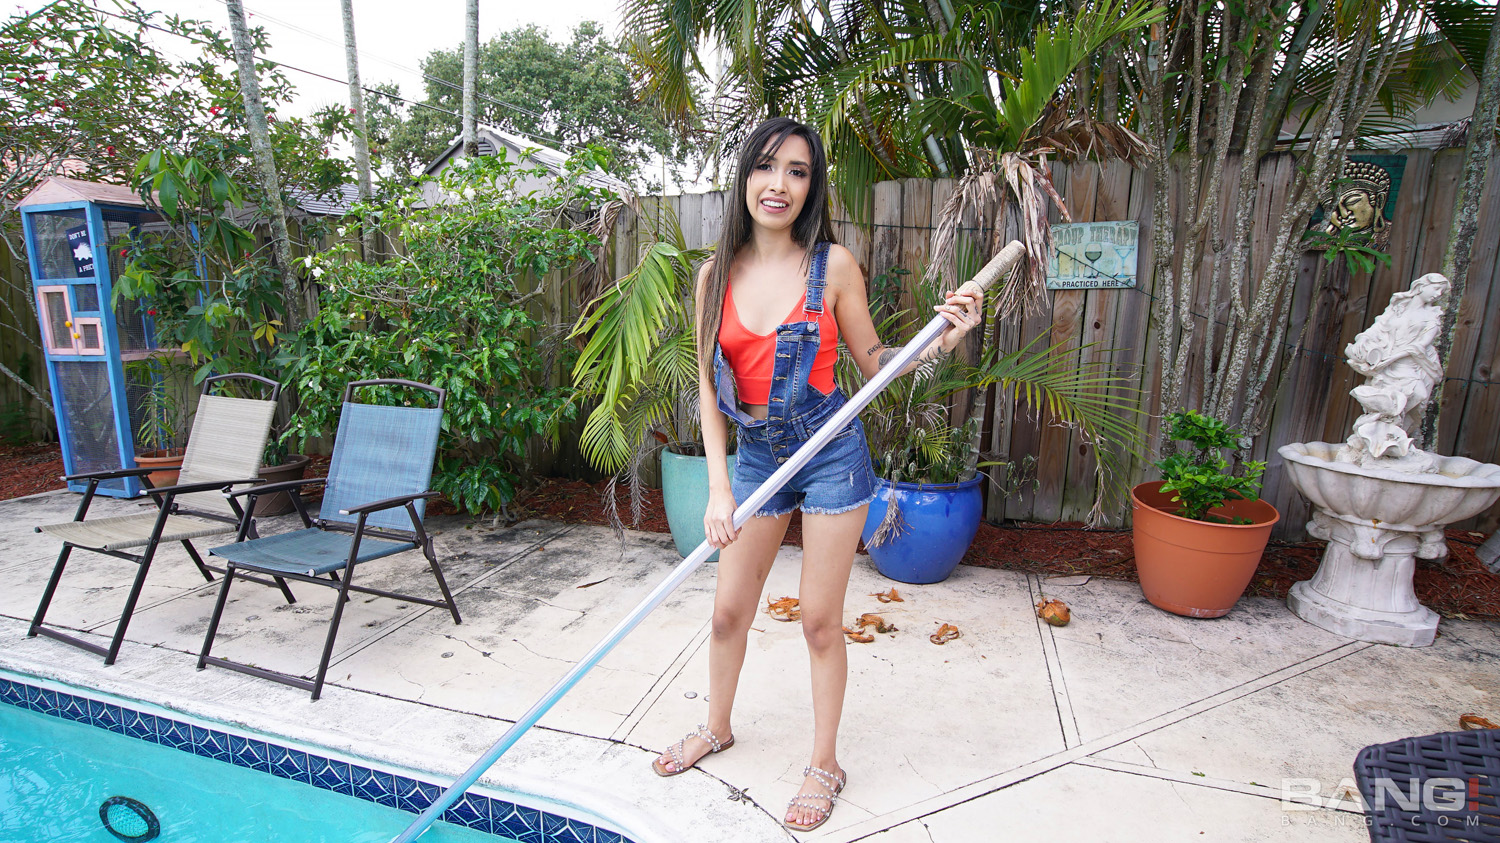 Paulina Ruiz bangs her client after cleaning his pool